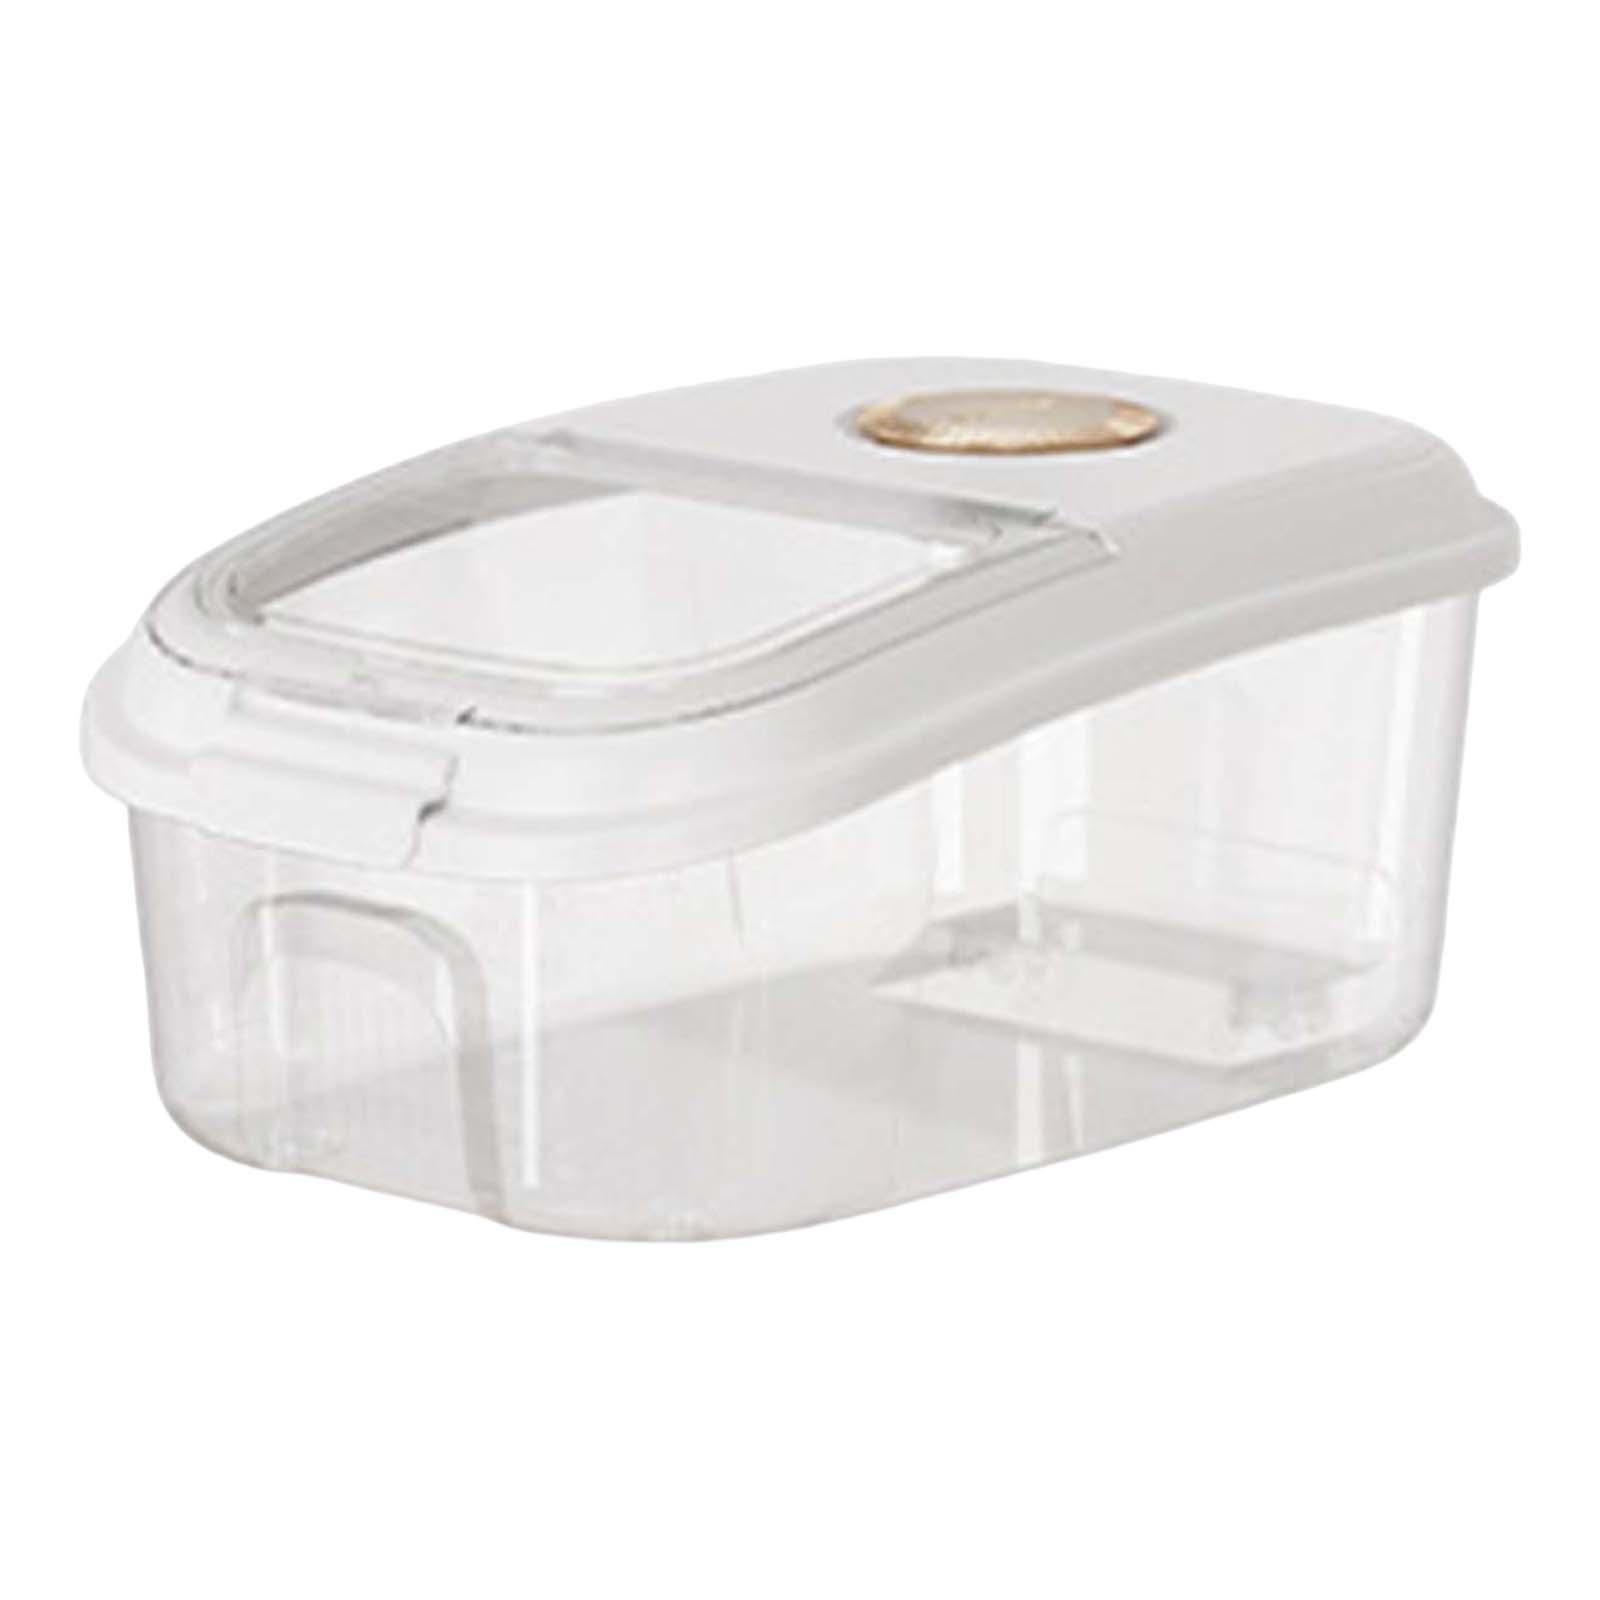 Rice Storage Container Cereal Dispenser Bucket Storage Bin for Cereal Nuts